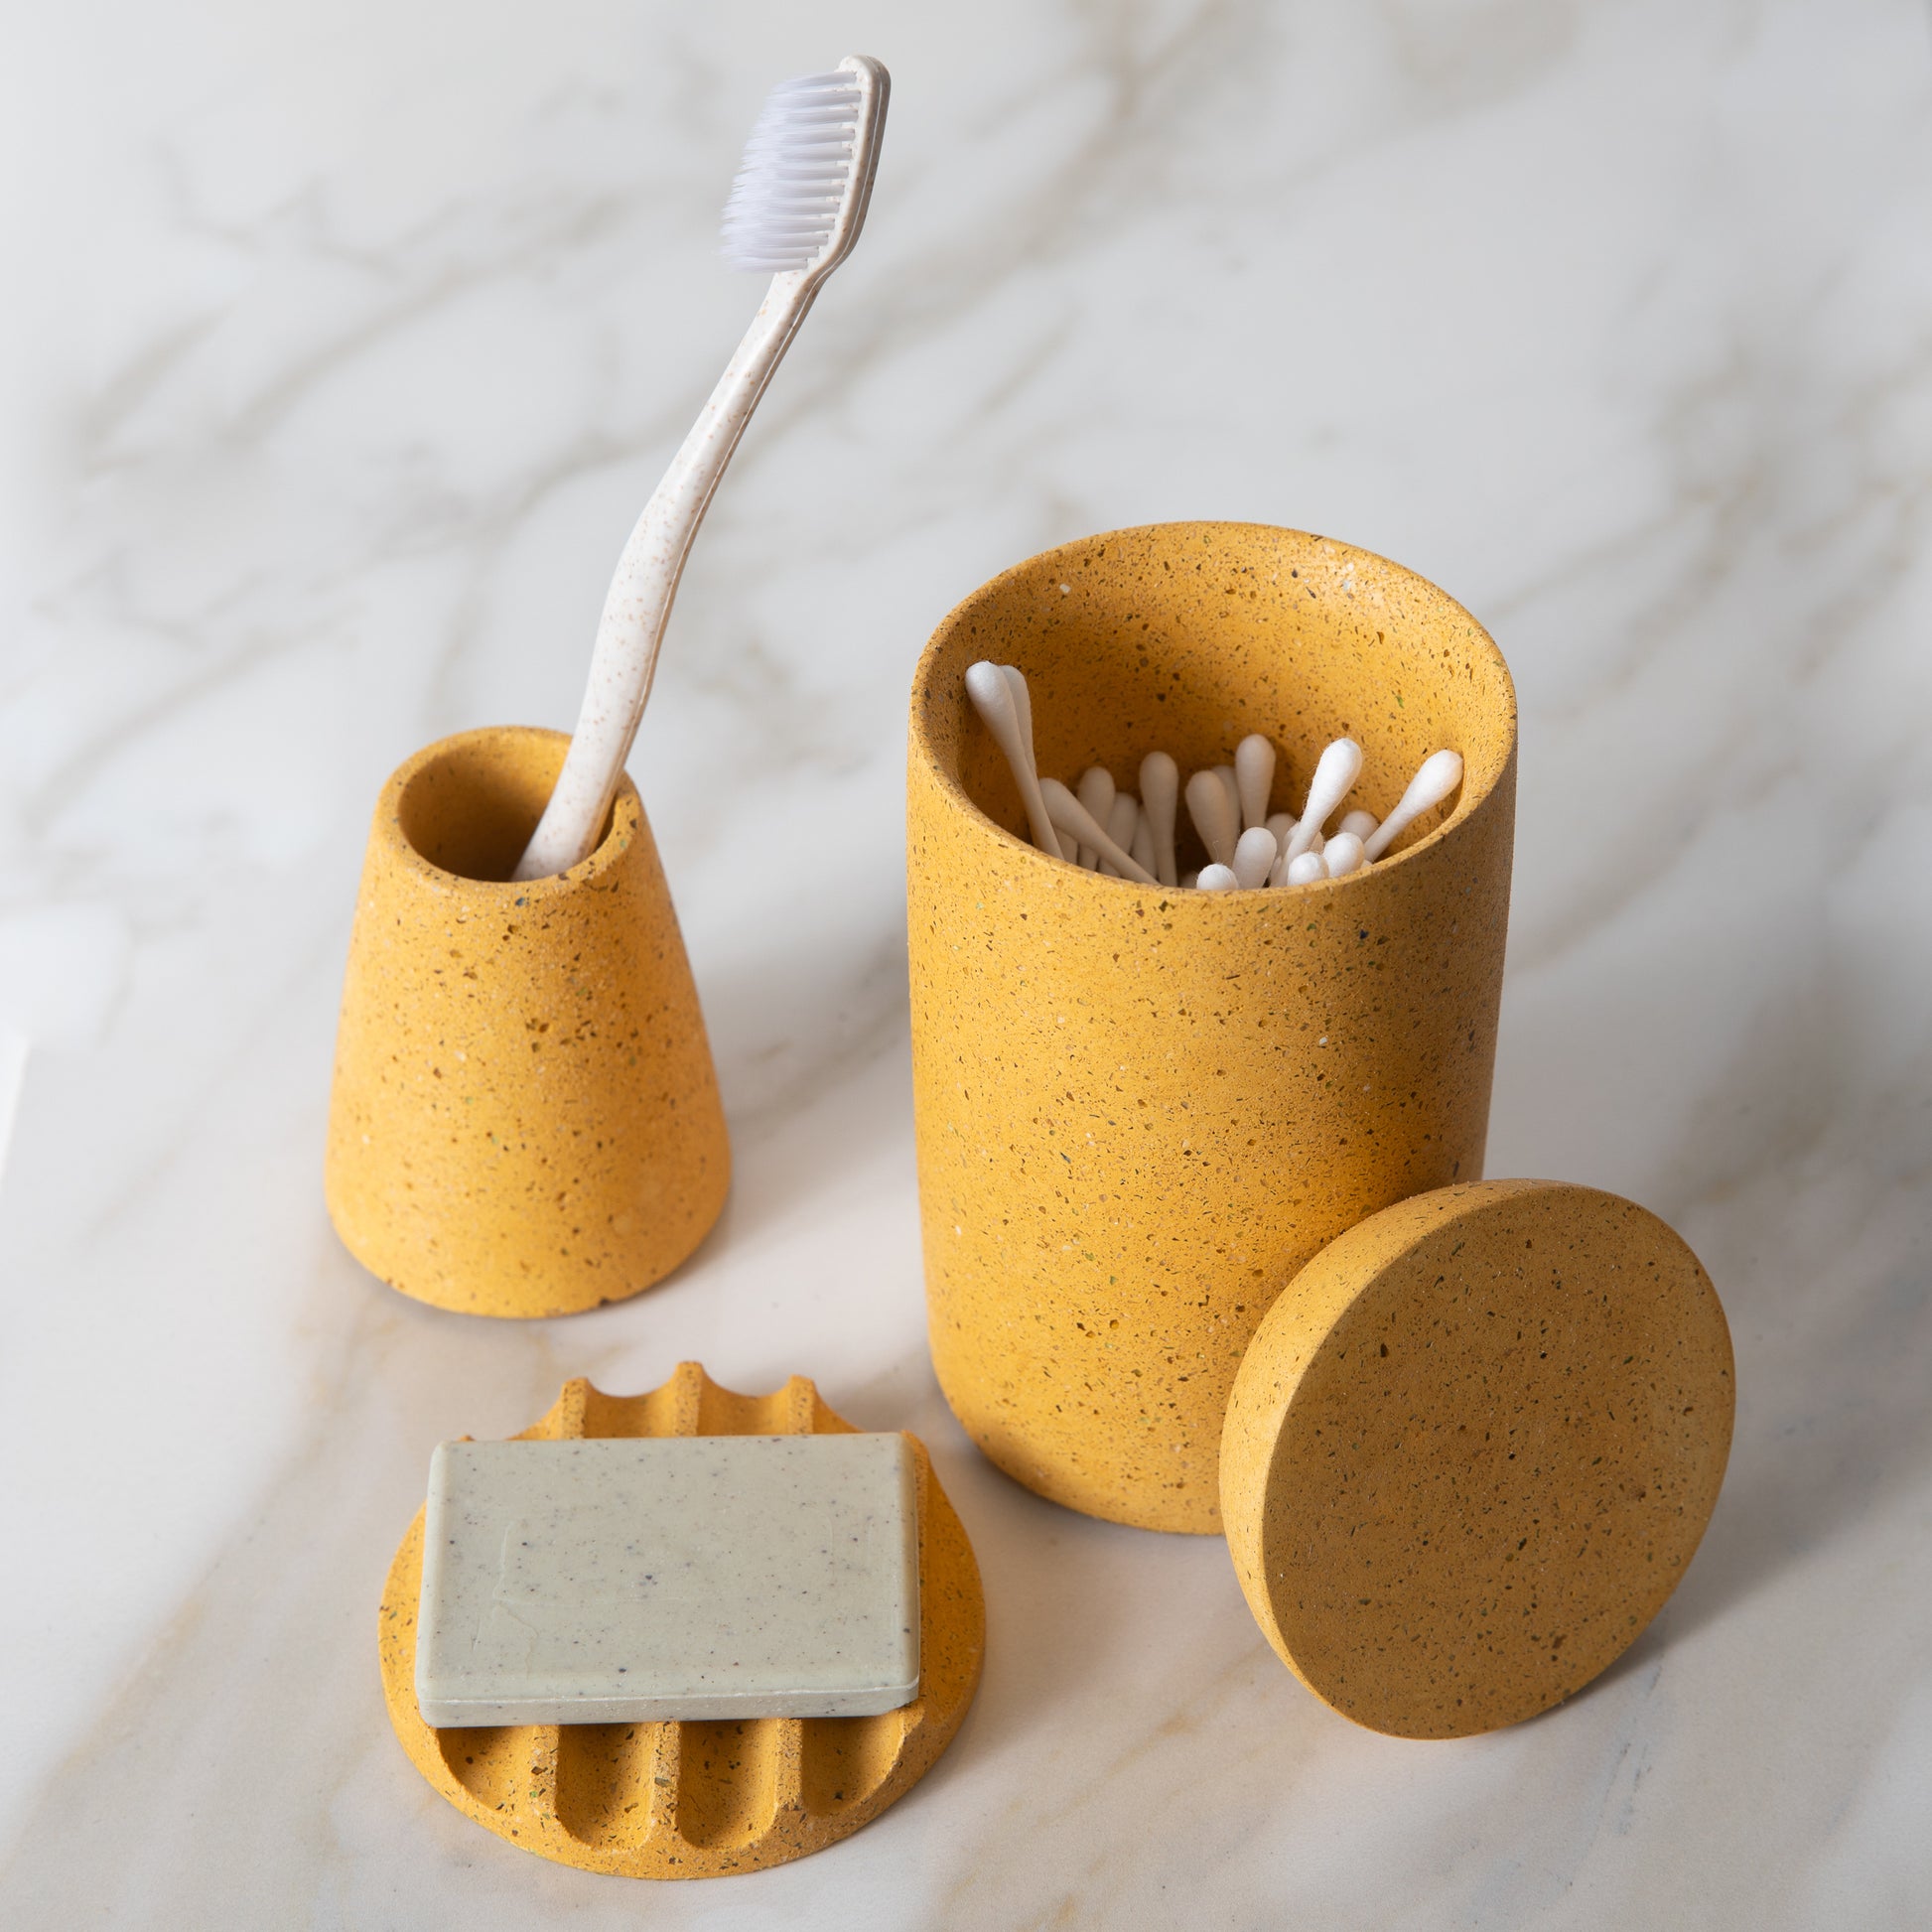 Gentle green toothbrush in our toothbrush holder, next to our mini soap dish and cotton swab holder.